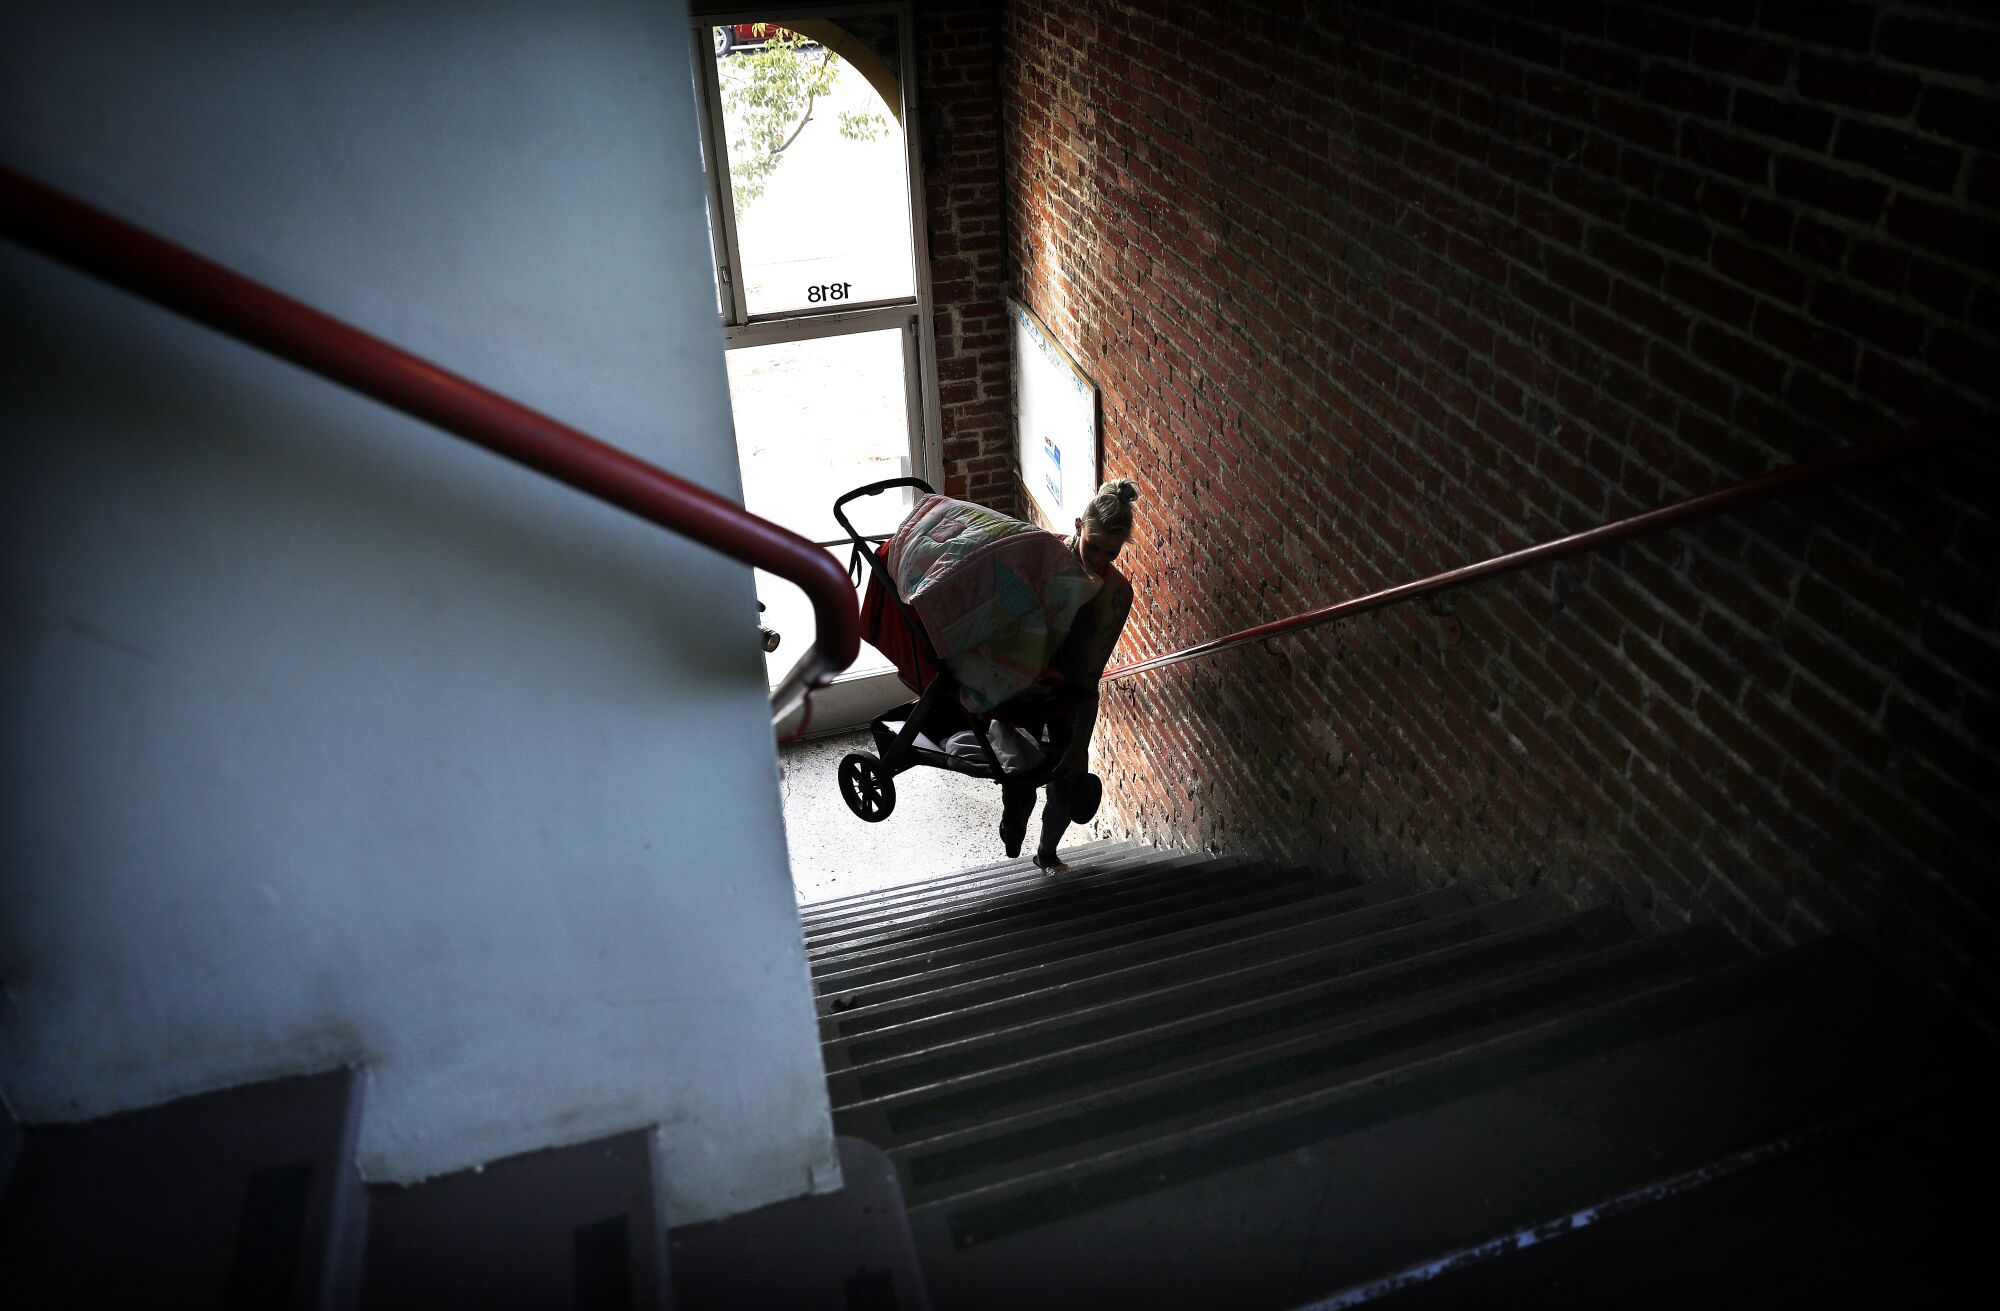 A woman backlit by a window climbs a flight of stairs carrying a baby in a stroller.